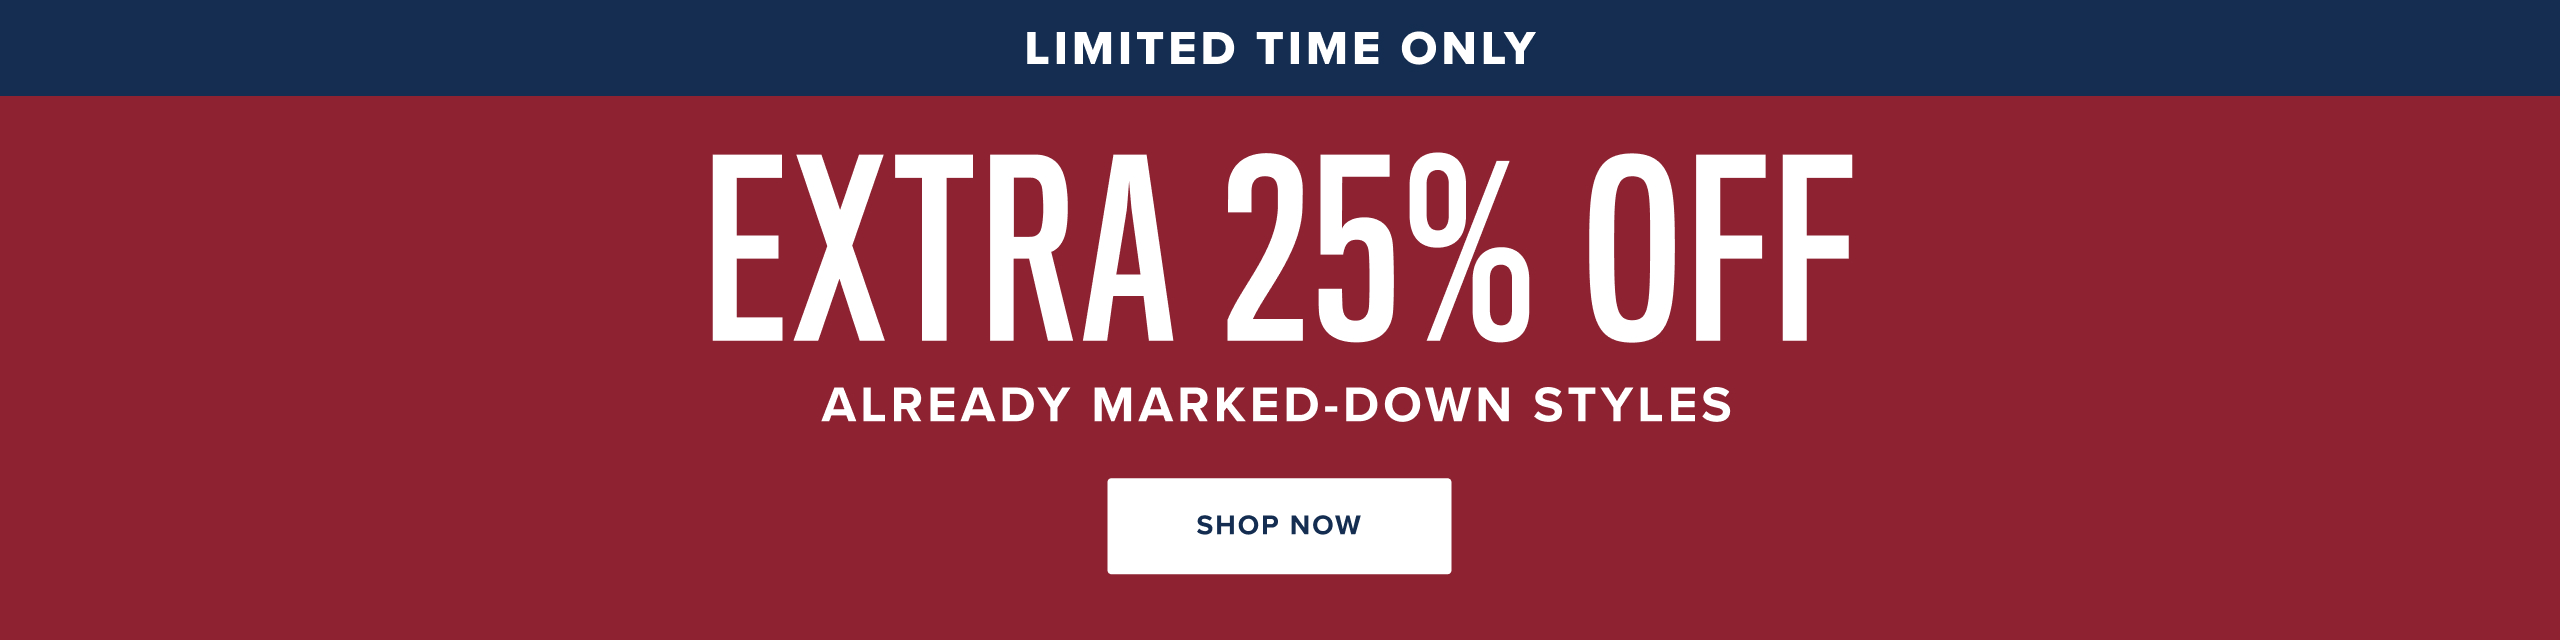 Extra 25% Off Already Marked-Down Styles. 